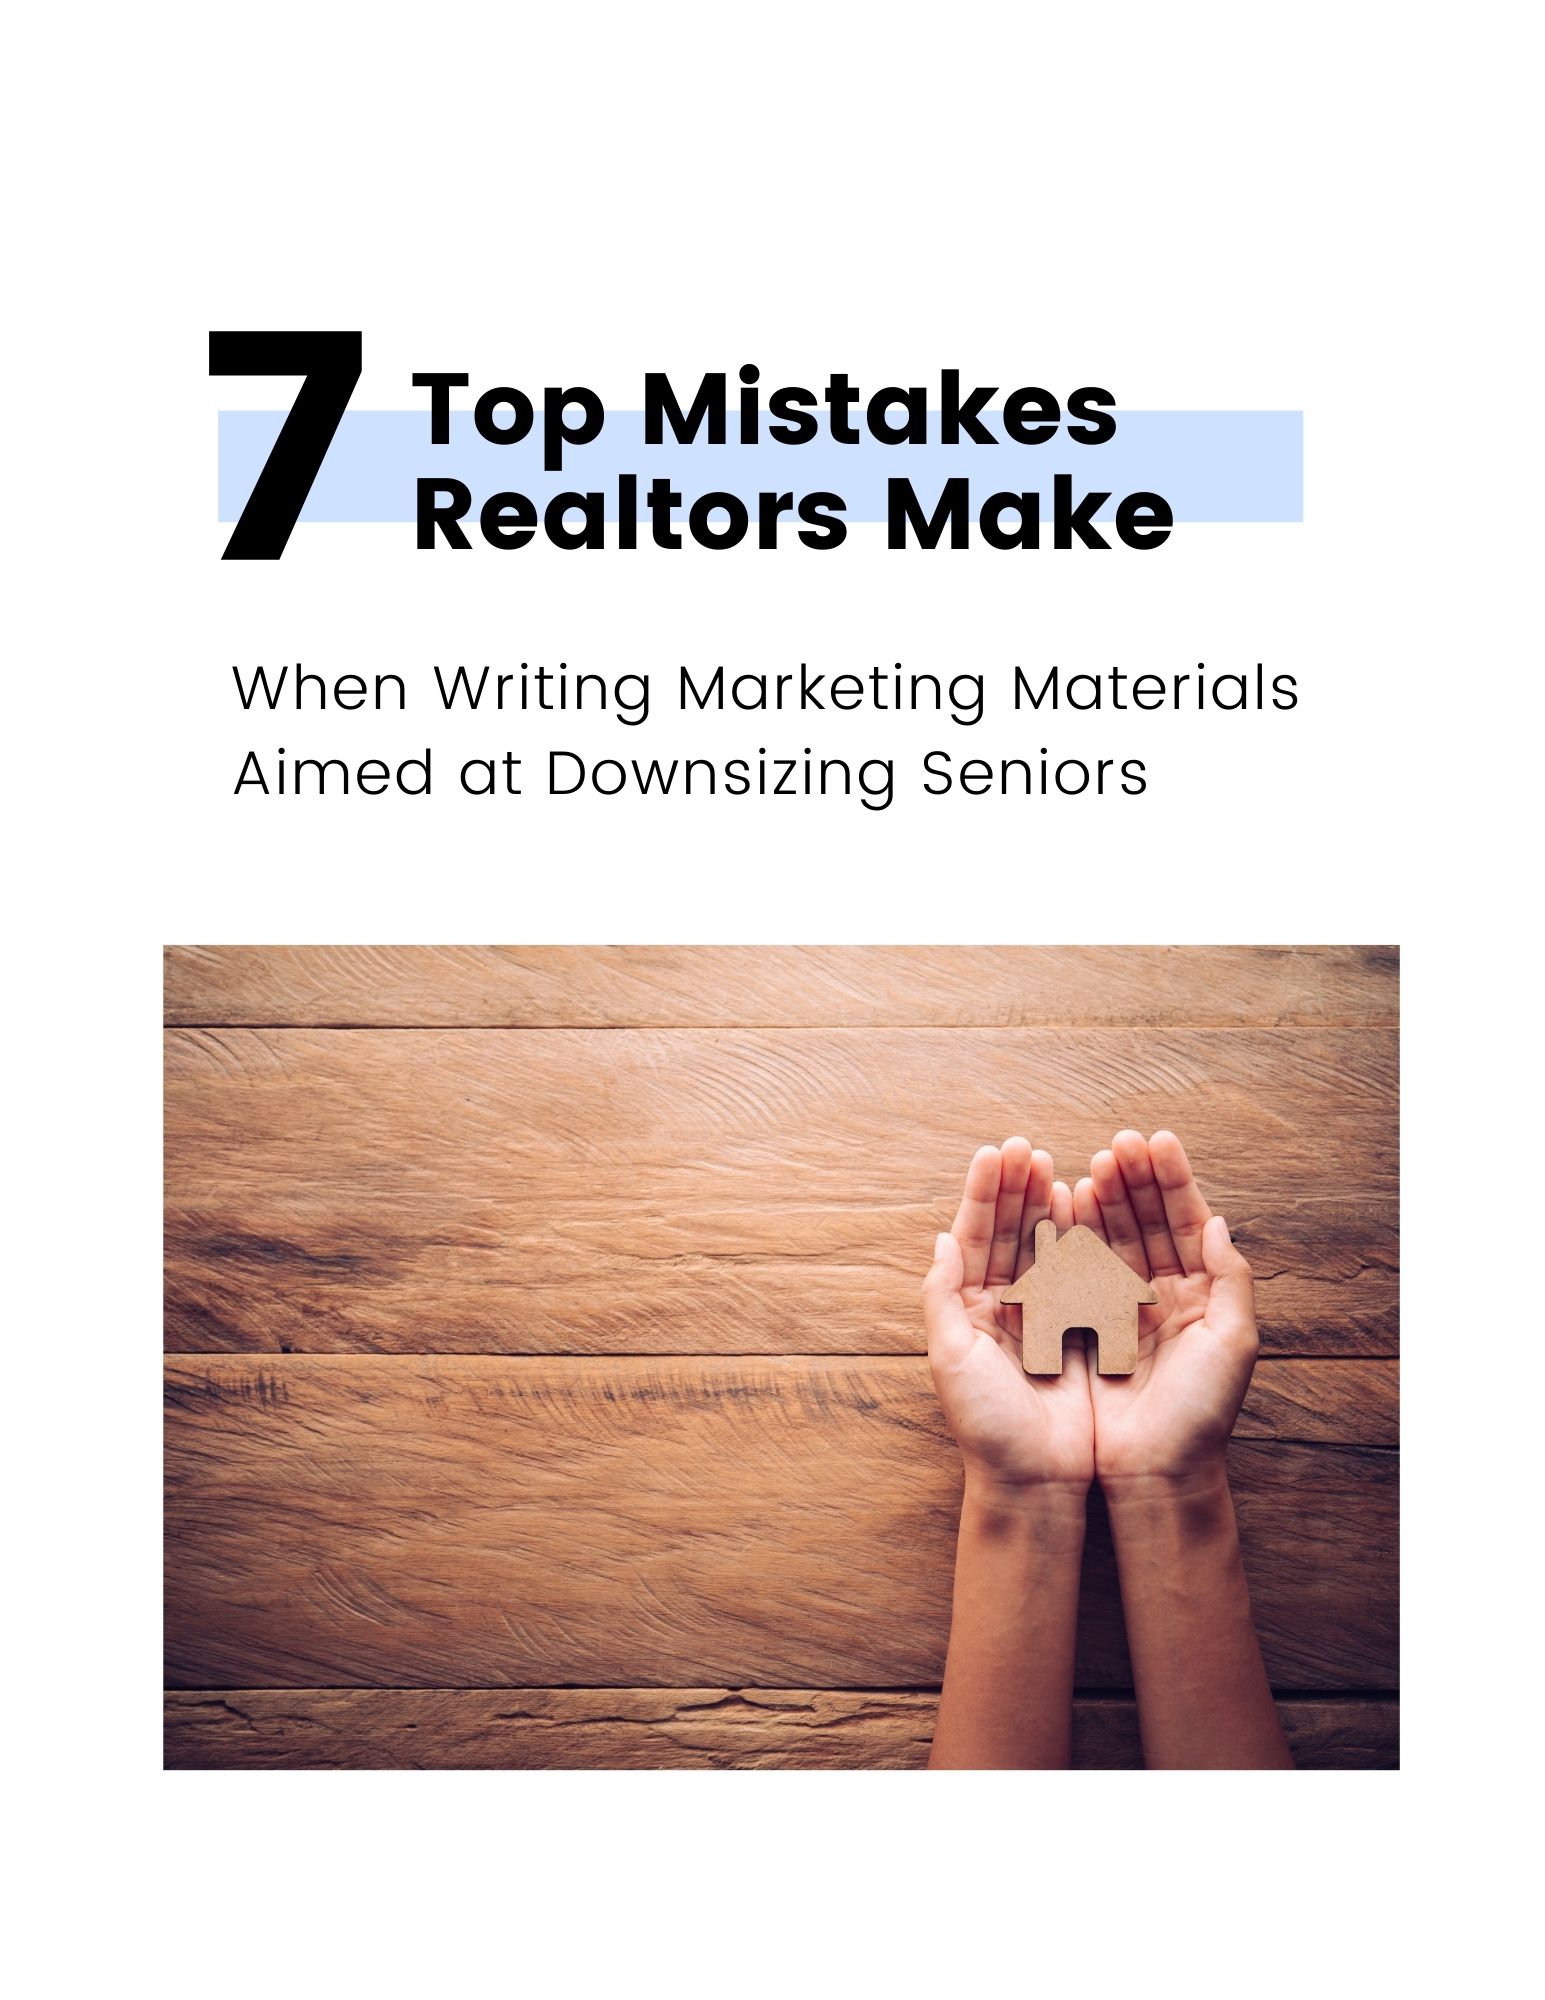 Free tips on writing real estate marketing content for seniors